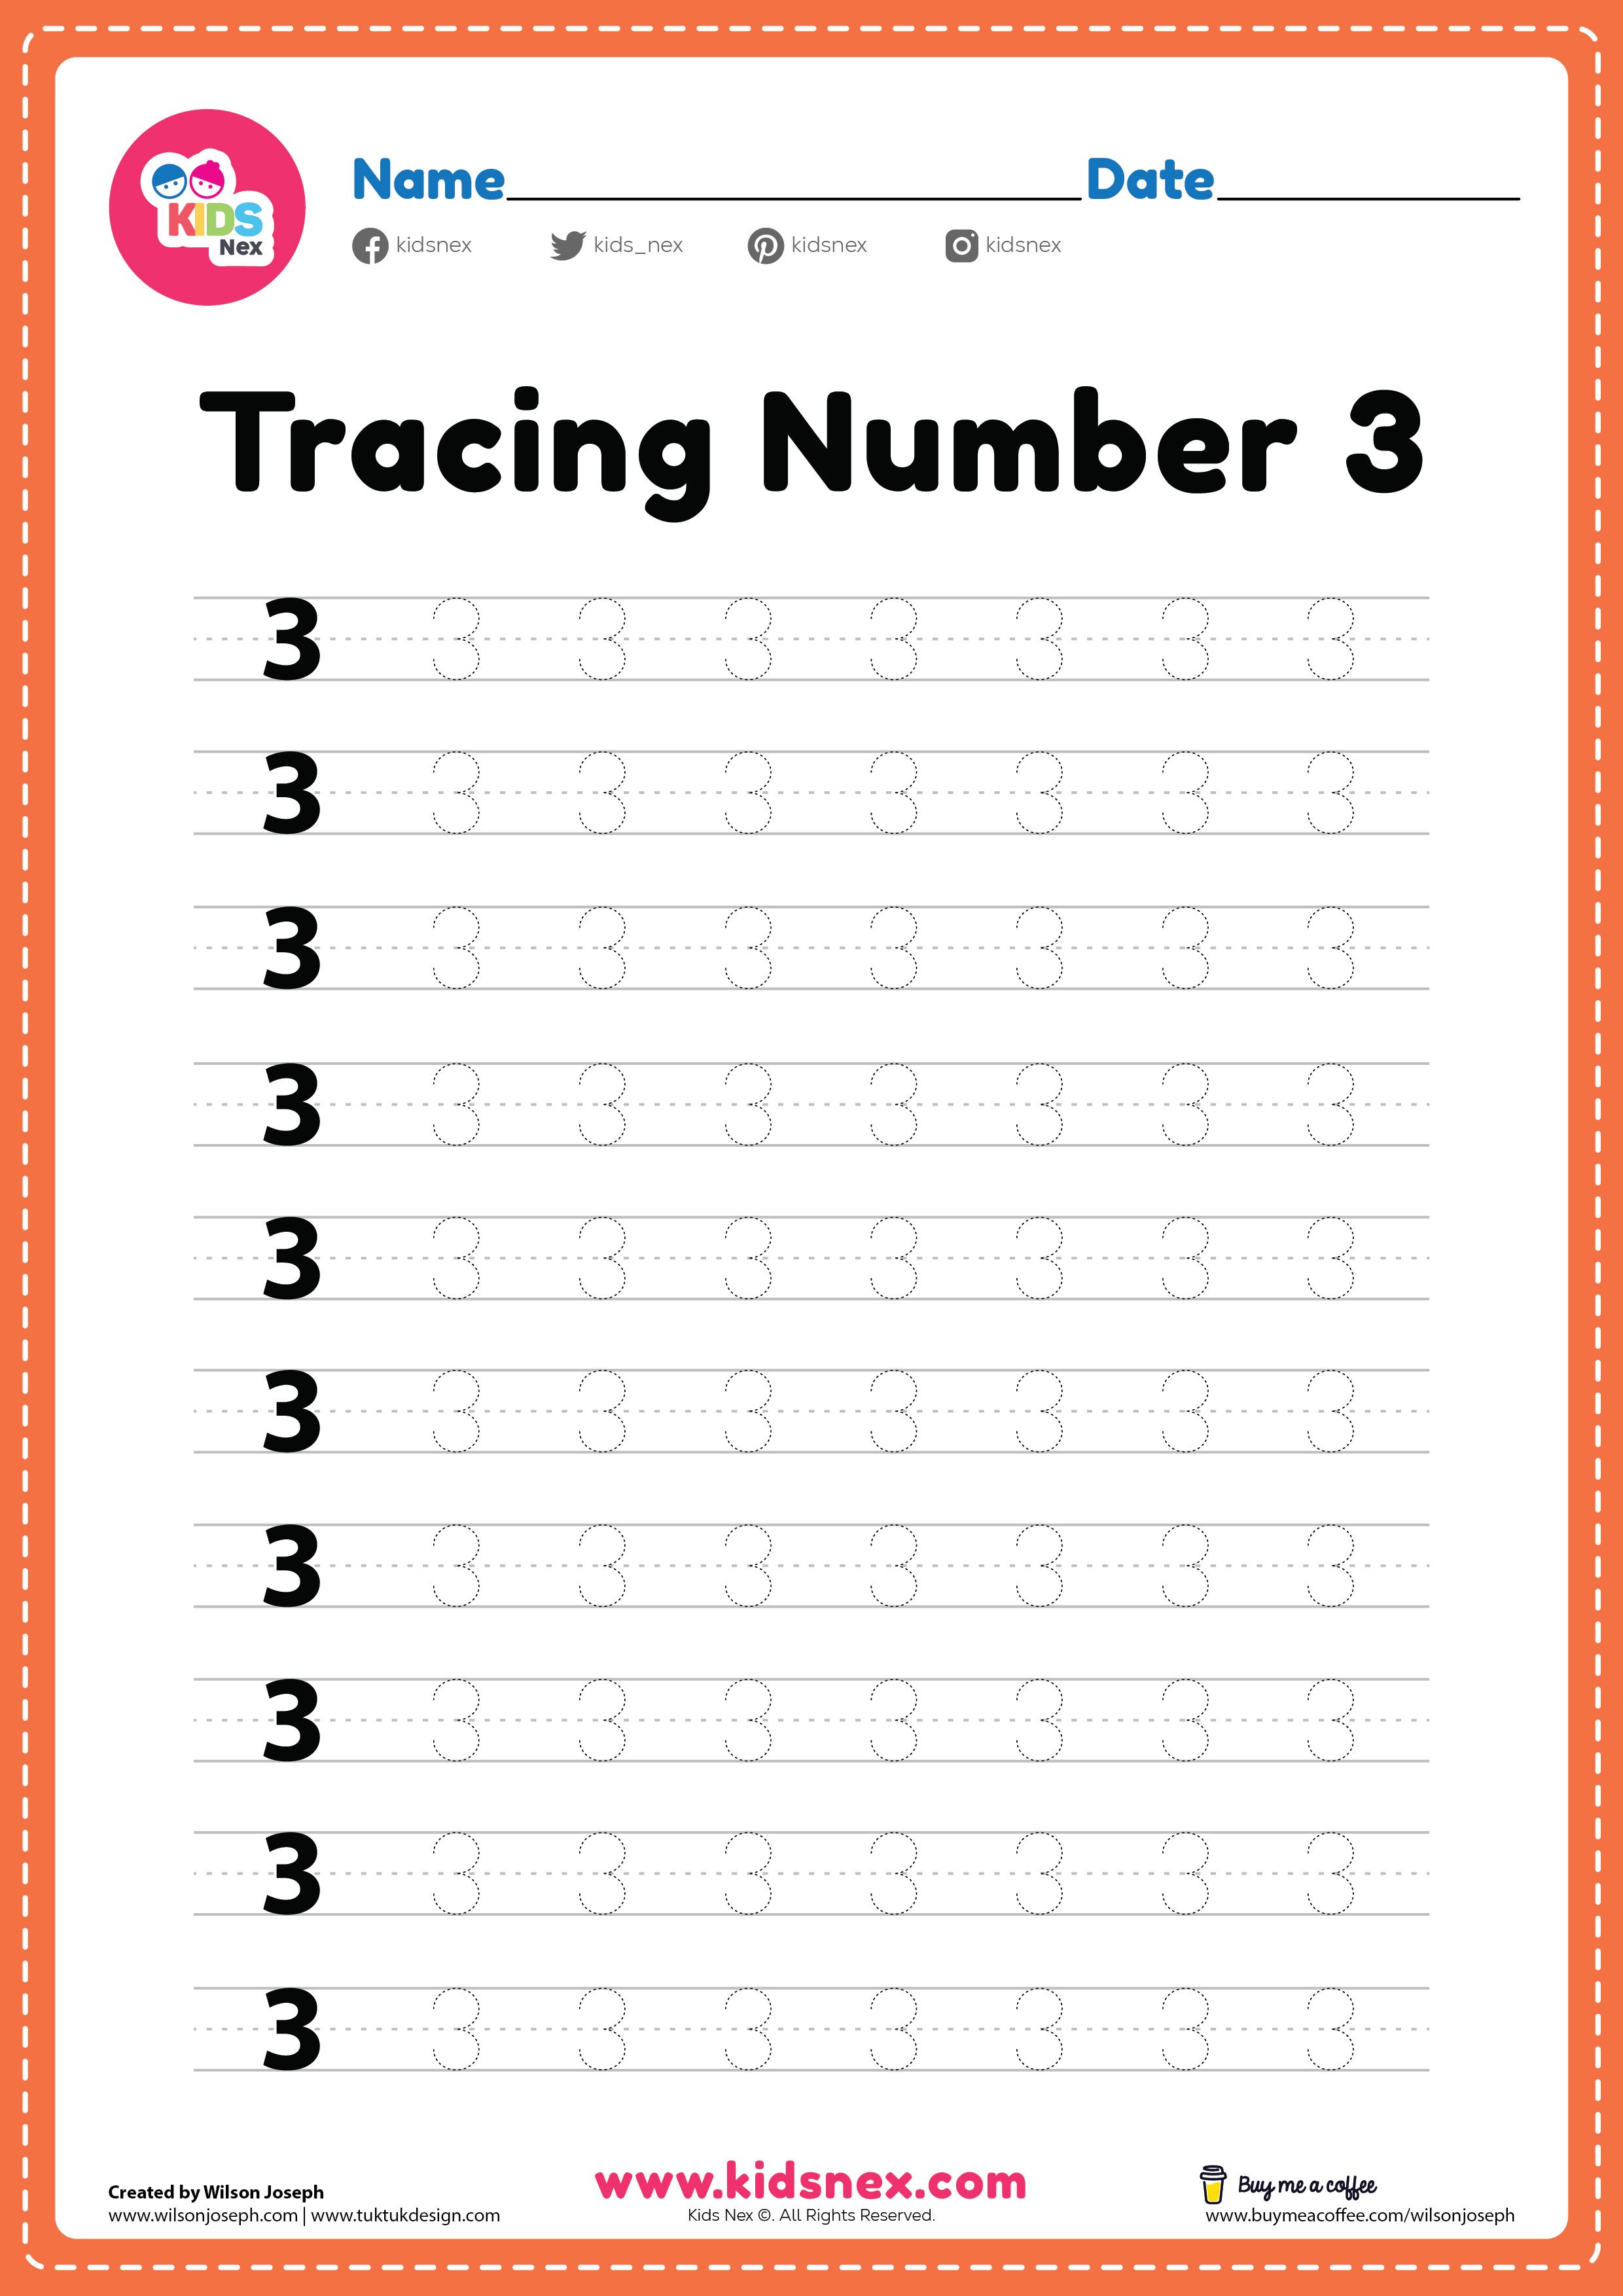 number-3-tracing-worksheets-pdf-goimages-io